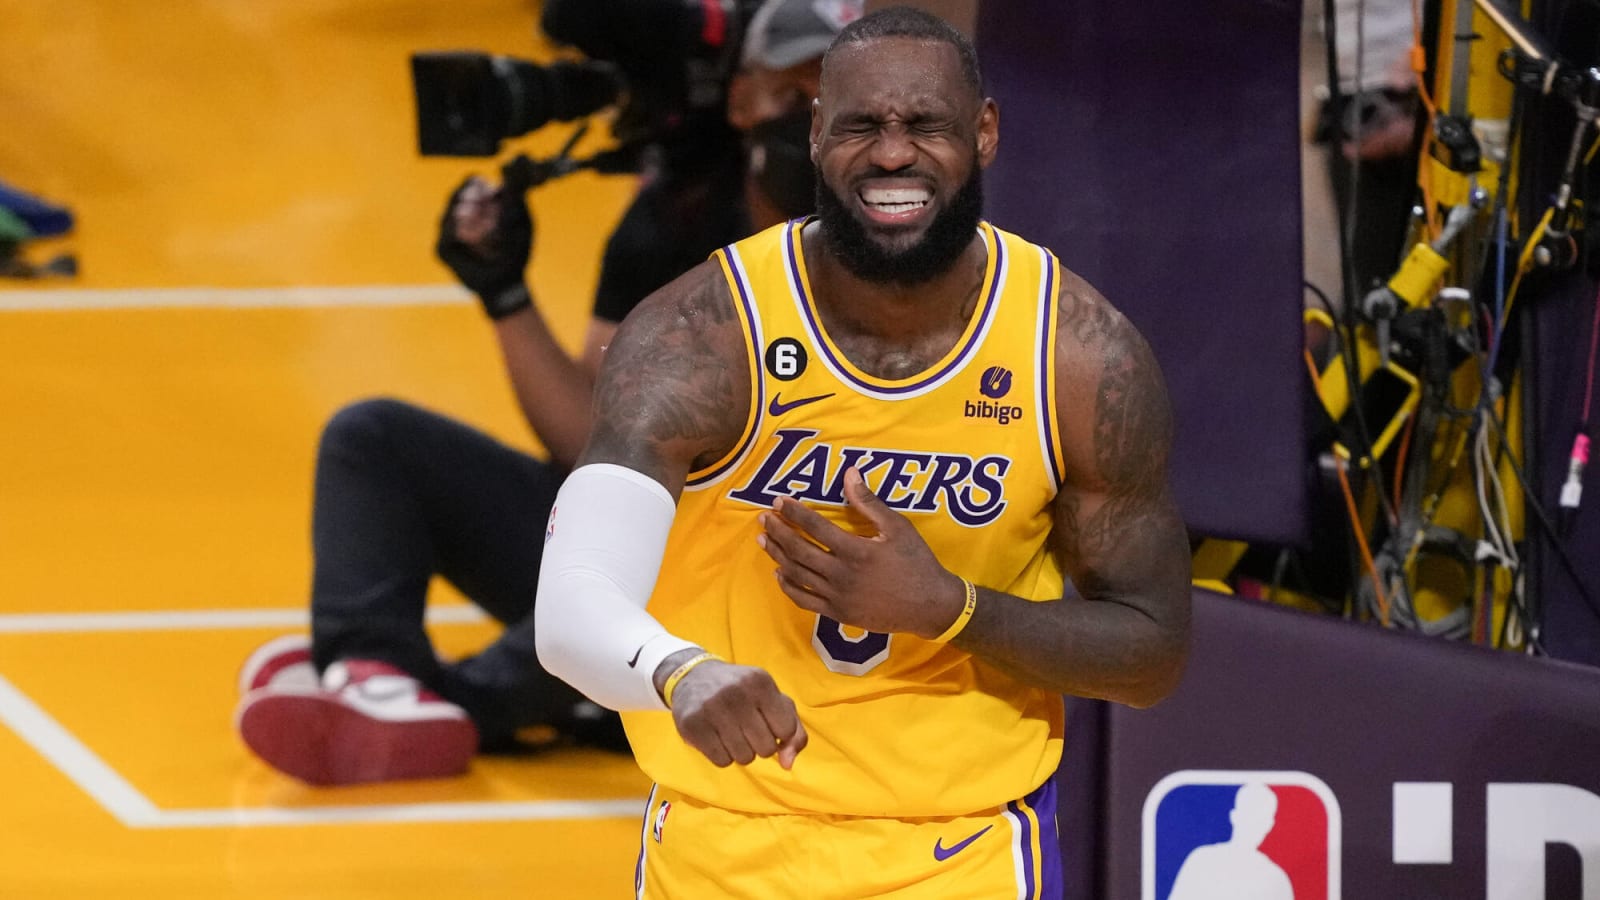 LeBron James’ jersey to be retired by Los Angeles Lakers